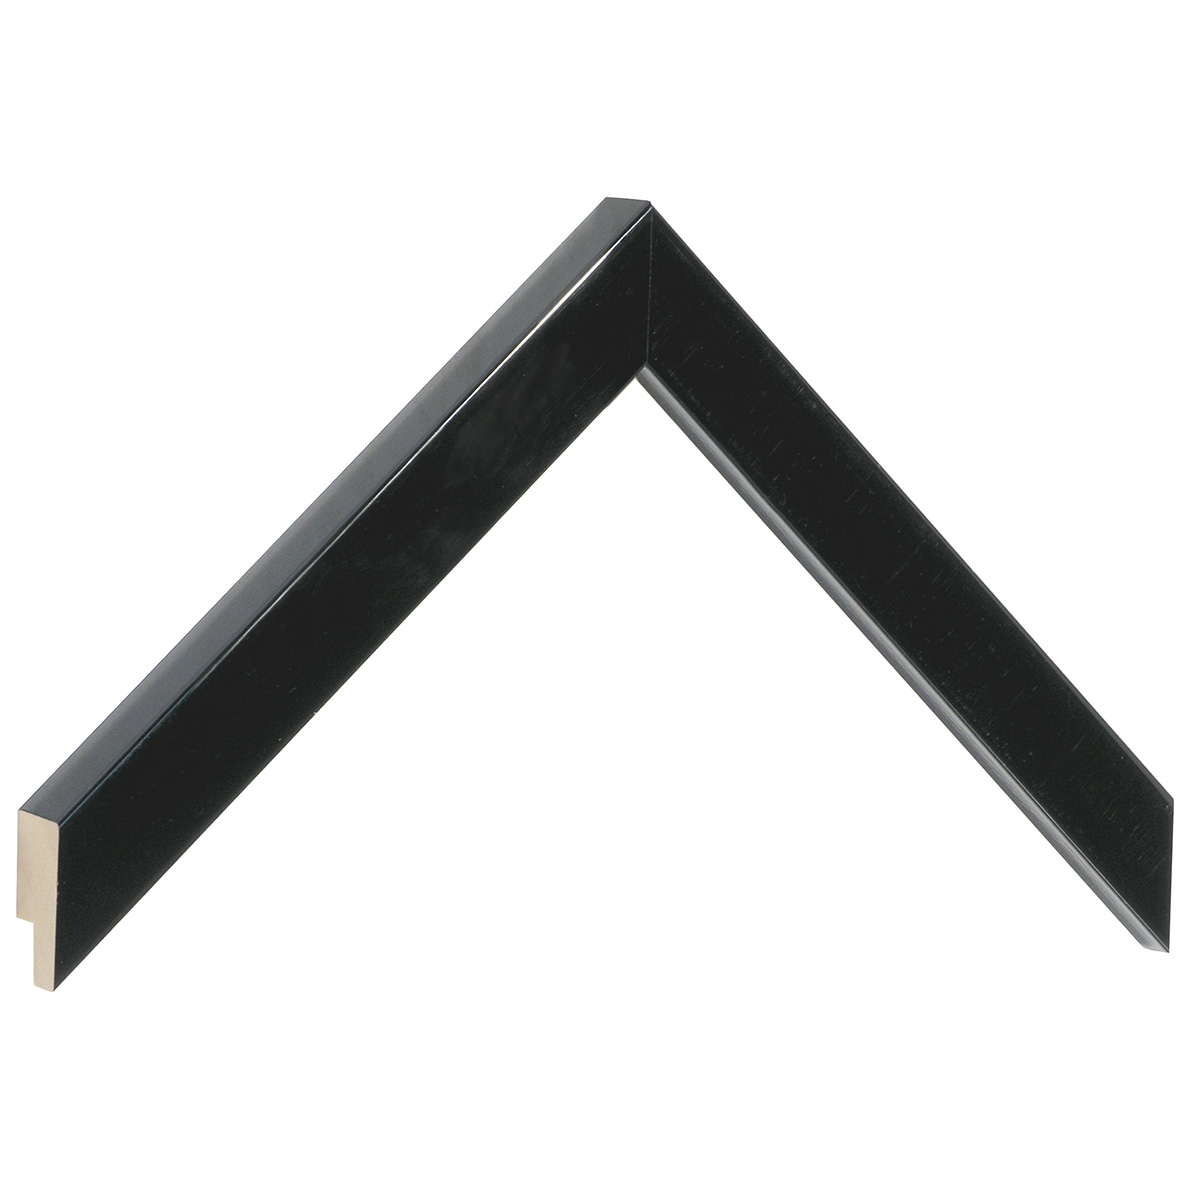 Moulding ayous, width 20mm height 20 - Glossy Black - Sample